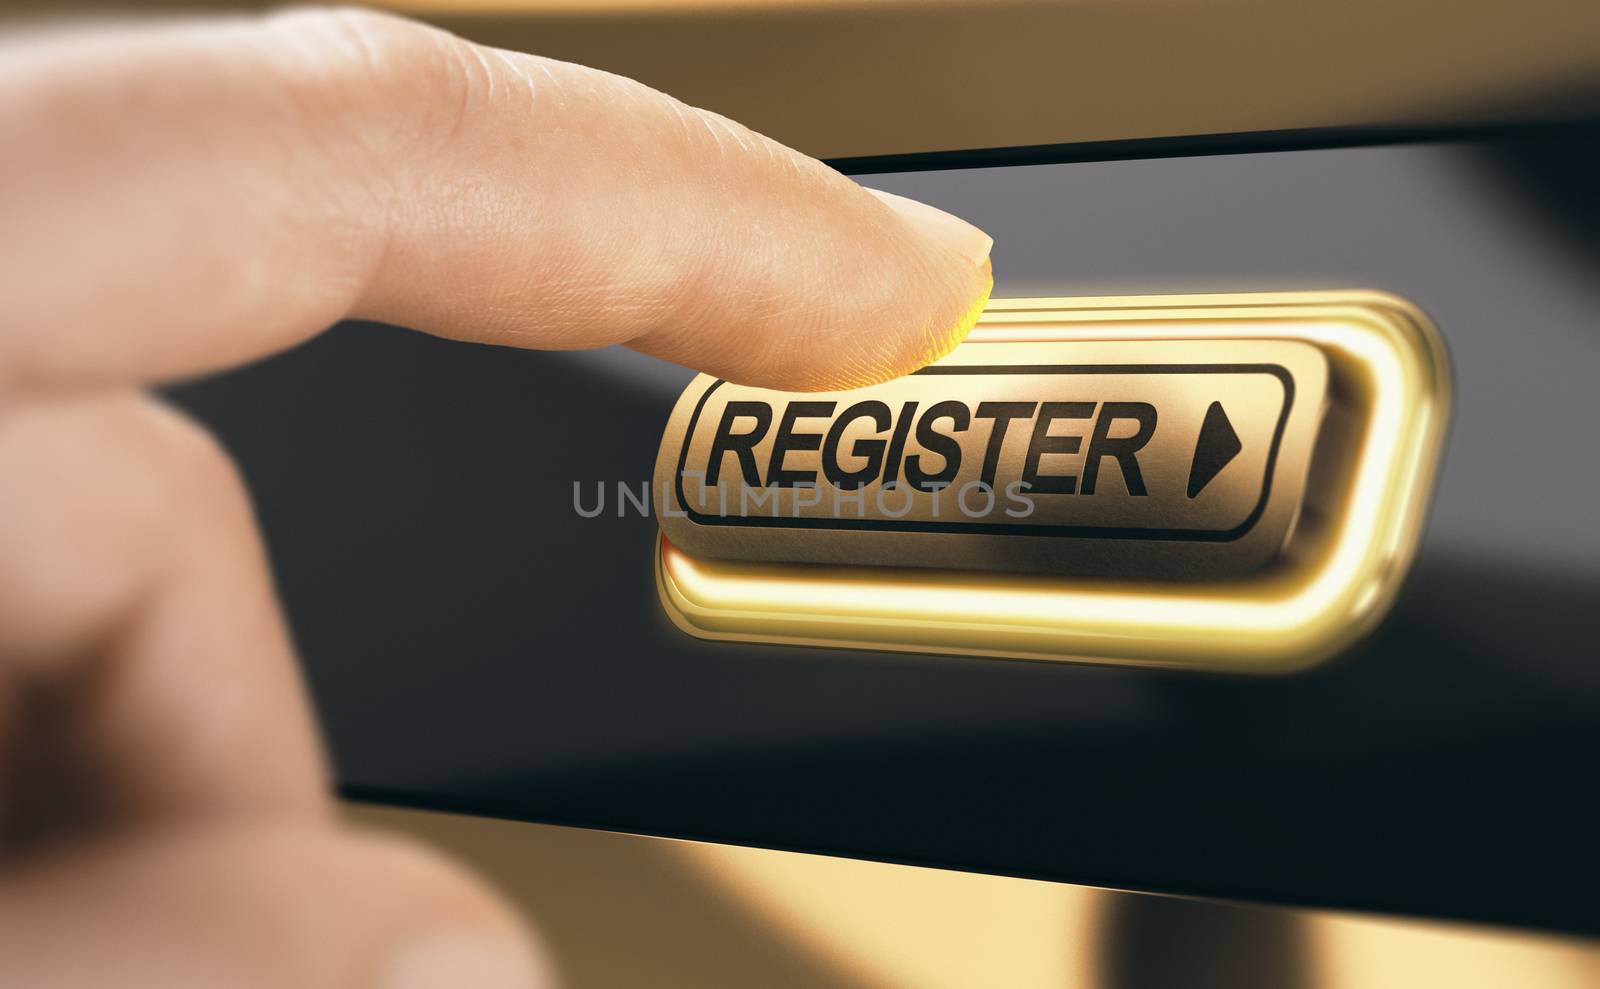 Finger pressing a golden register button to become a new member of an organization. Concept of membership registration. Composite image between a hand photography and a 3D background.